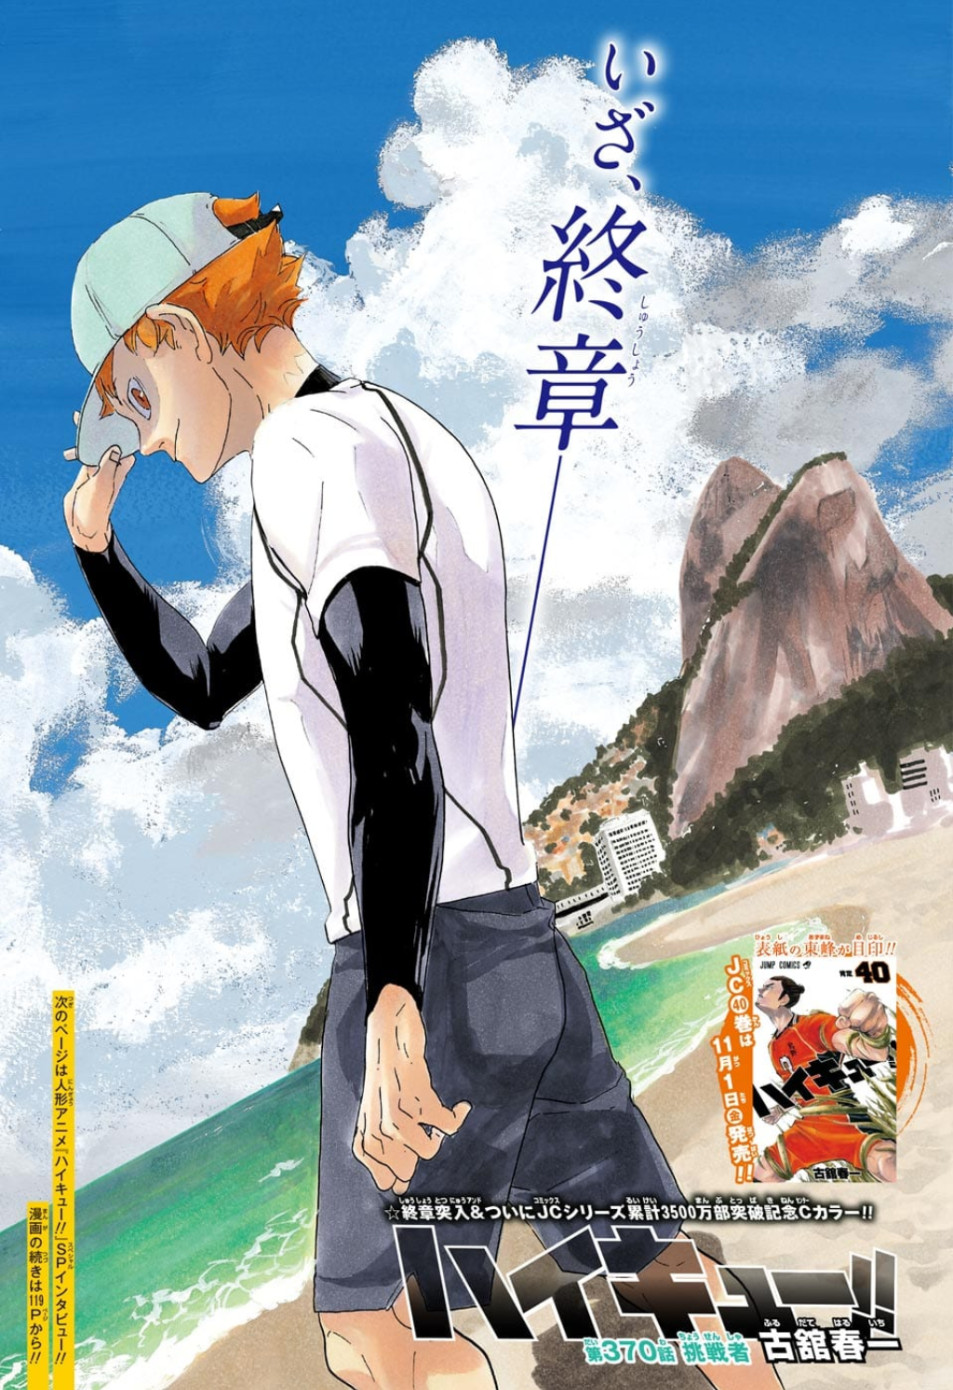 Haikyuu Could End Up With Shonen Jump's Best Ending This Year